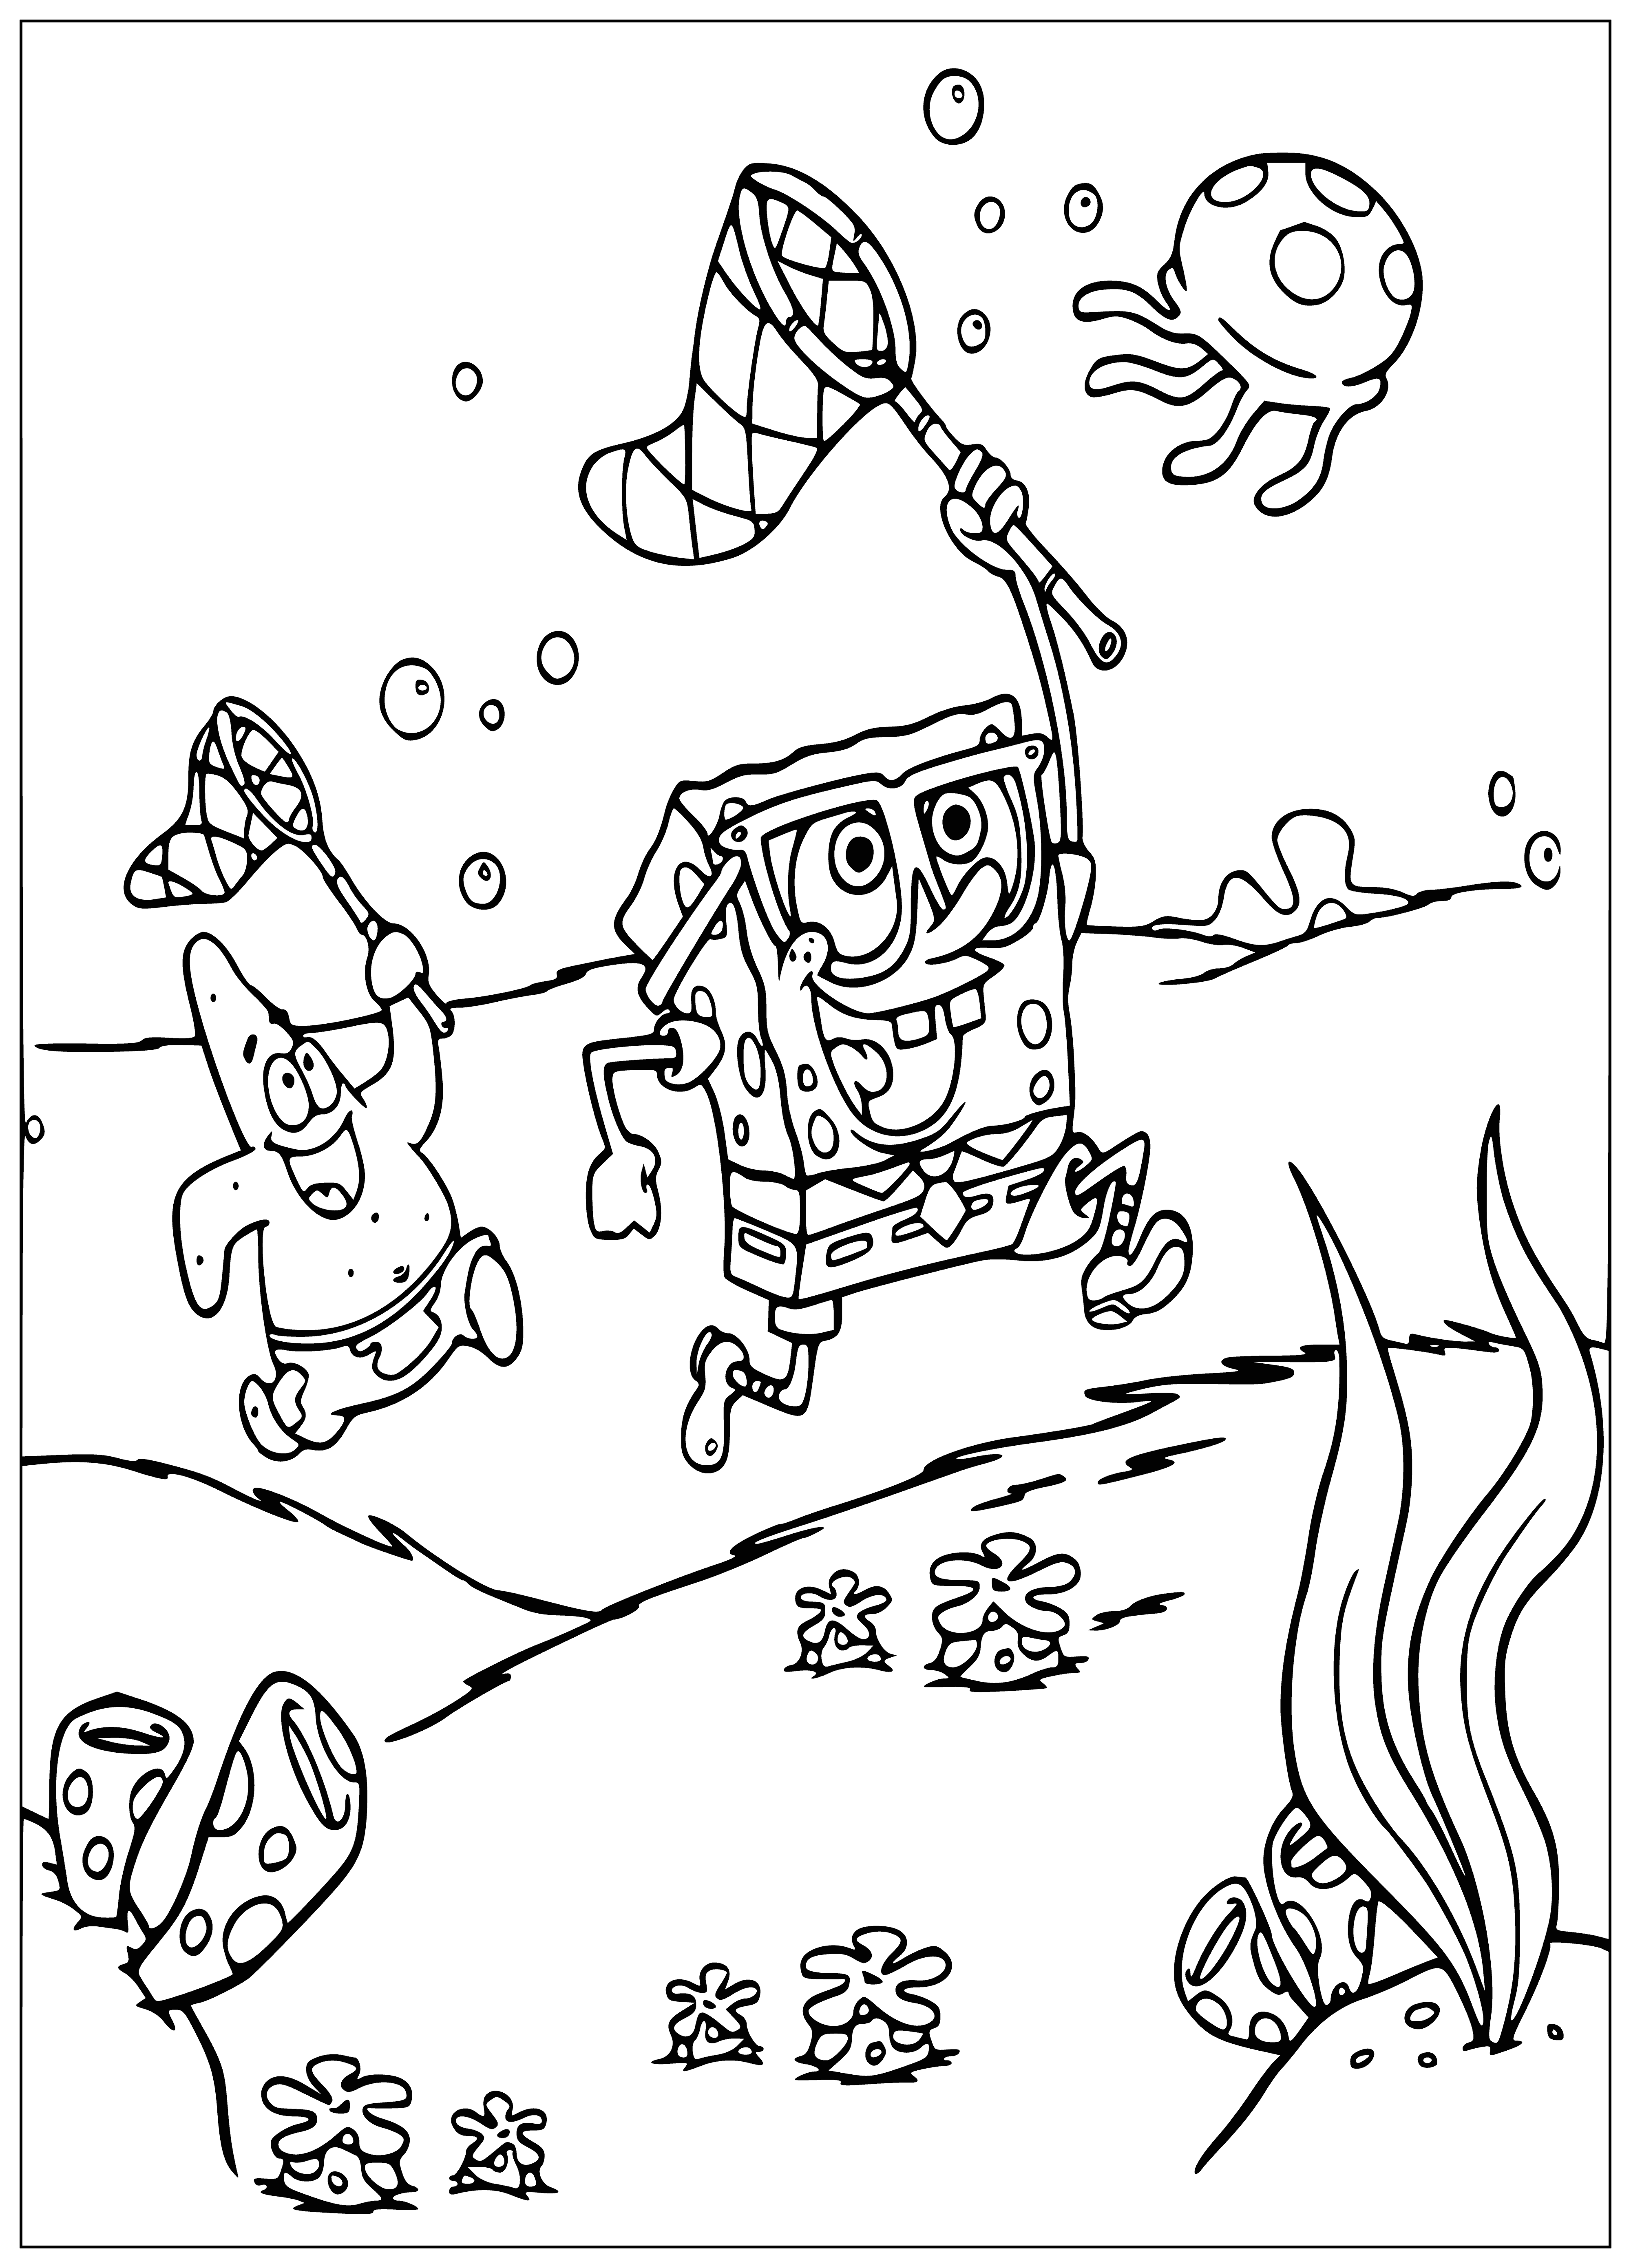 coloring page: -> SpongeBob and friends catch jellyfish, having fun in the process.